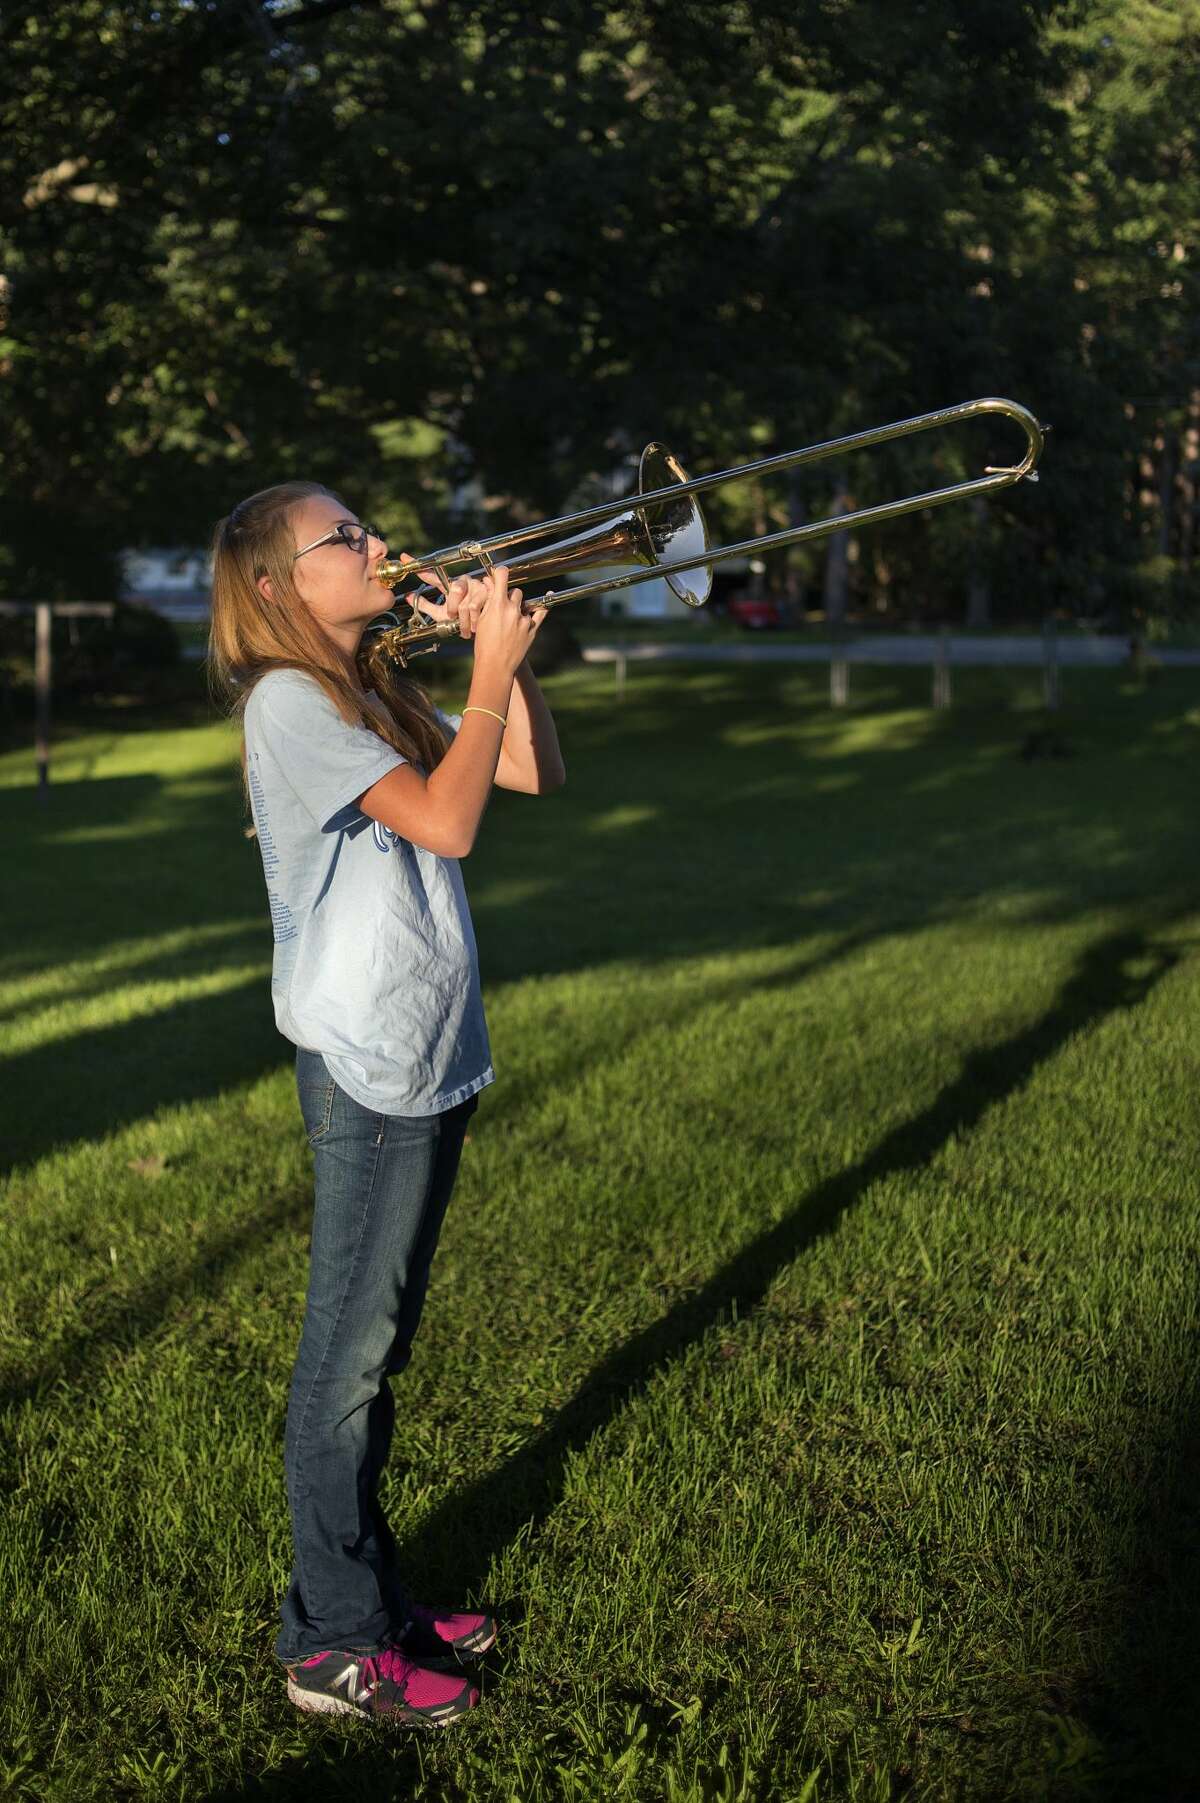 BRITTNEY LOHMILLER | blohmiller@mdn.net Meridian High School freshman Cassidy Forbes practices her trombone in her backyard September 2, 2016 in Sanford. "The band program is what made me want to stay at Meridian," Cassidy said. "We're no know for our sports but our band is good."